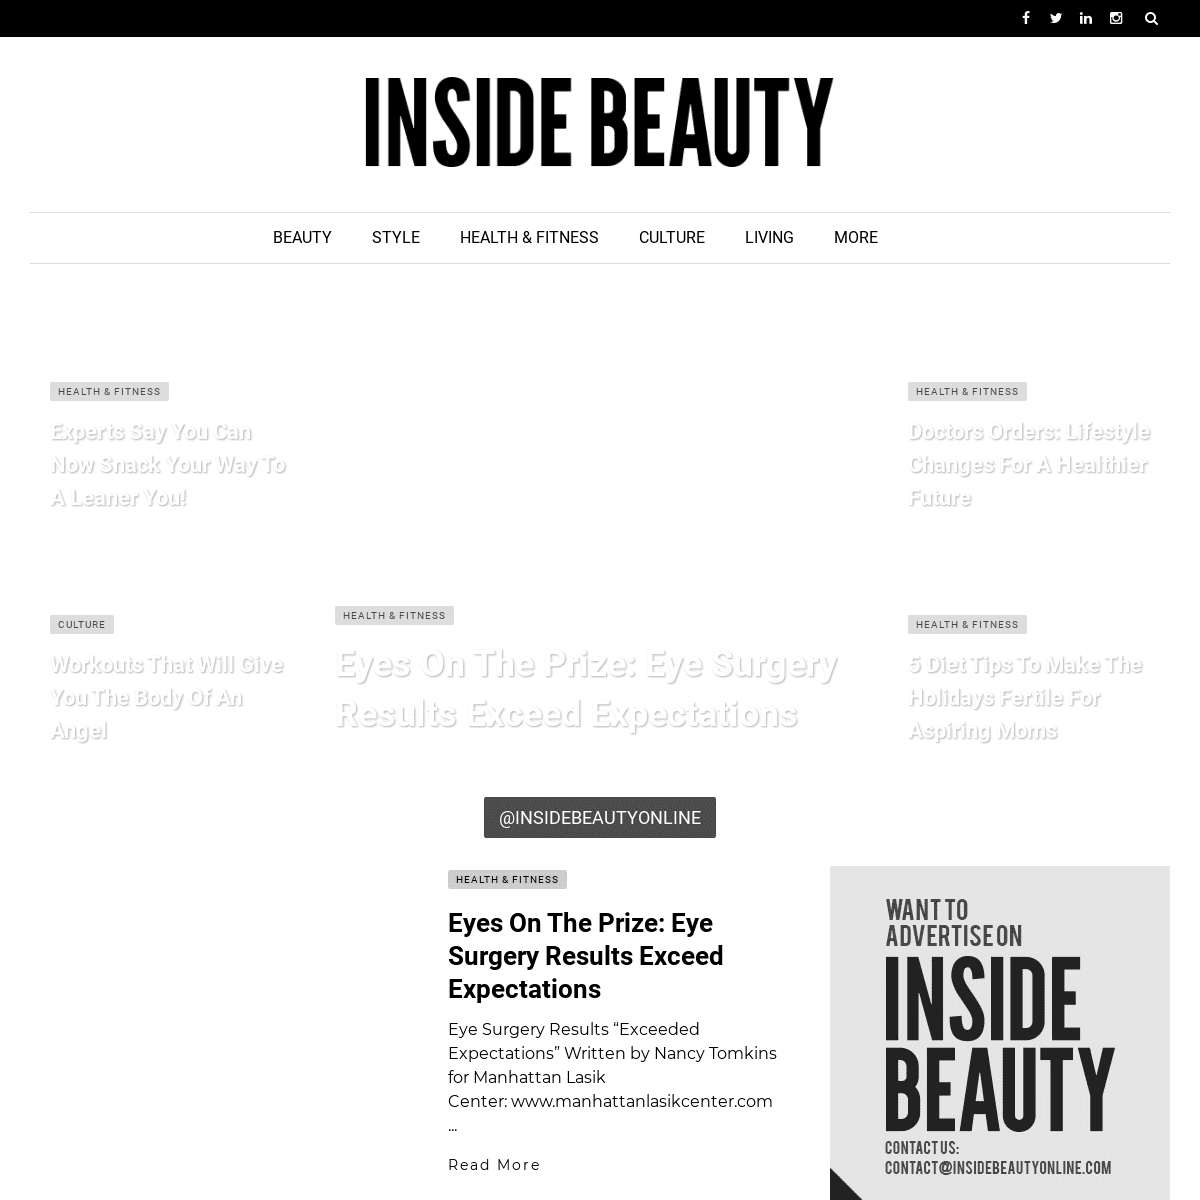 A complete backup of https://insidebeautyonline.com